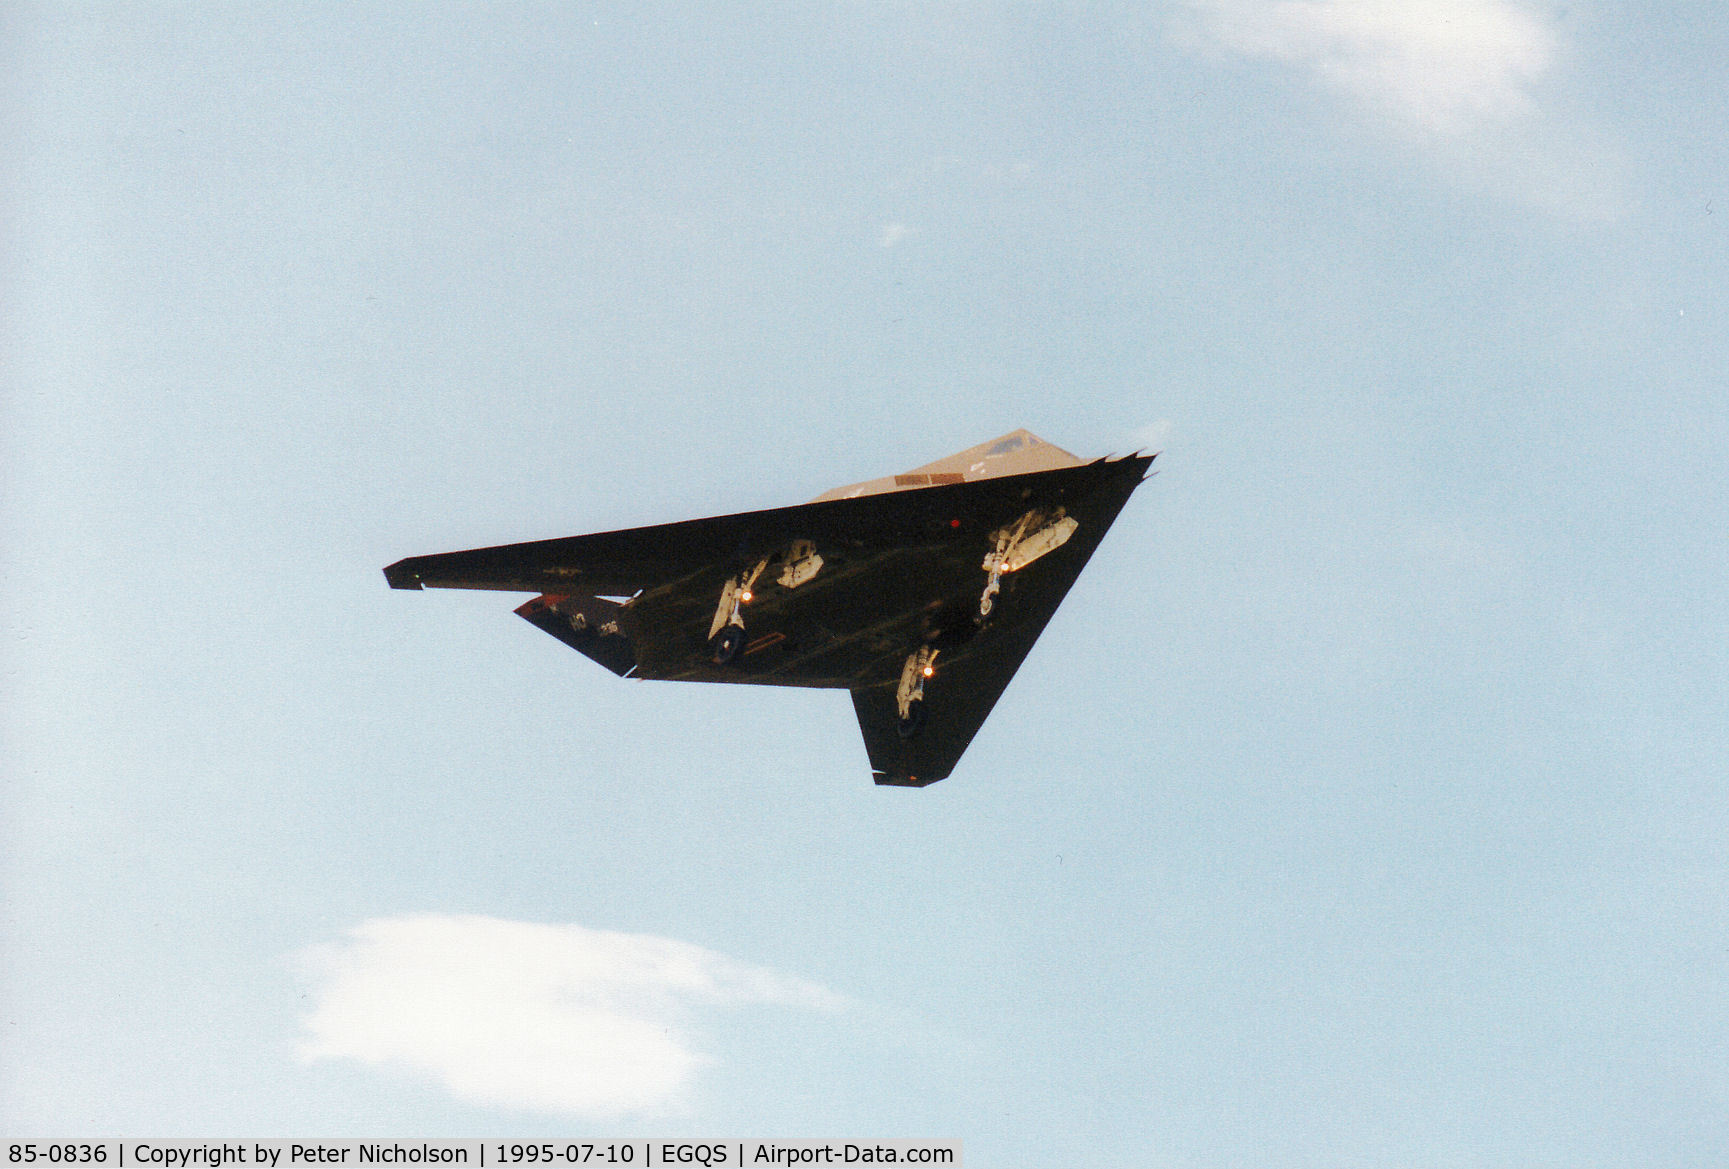 85-0836, 1985 Lockheed F-117A Nighthawk C/N A.4058, F-117A Nighthawk, callsign Stealth 2, of Holloman AFB's 49th Fighter Wing on  a practice approach to Runway 10 at RAF Lossiemouth in the Summer of 1995.